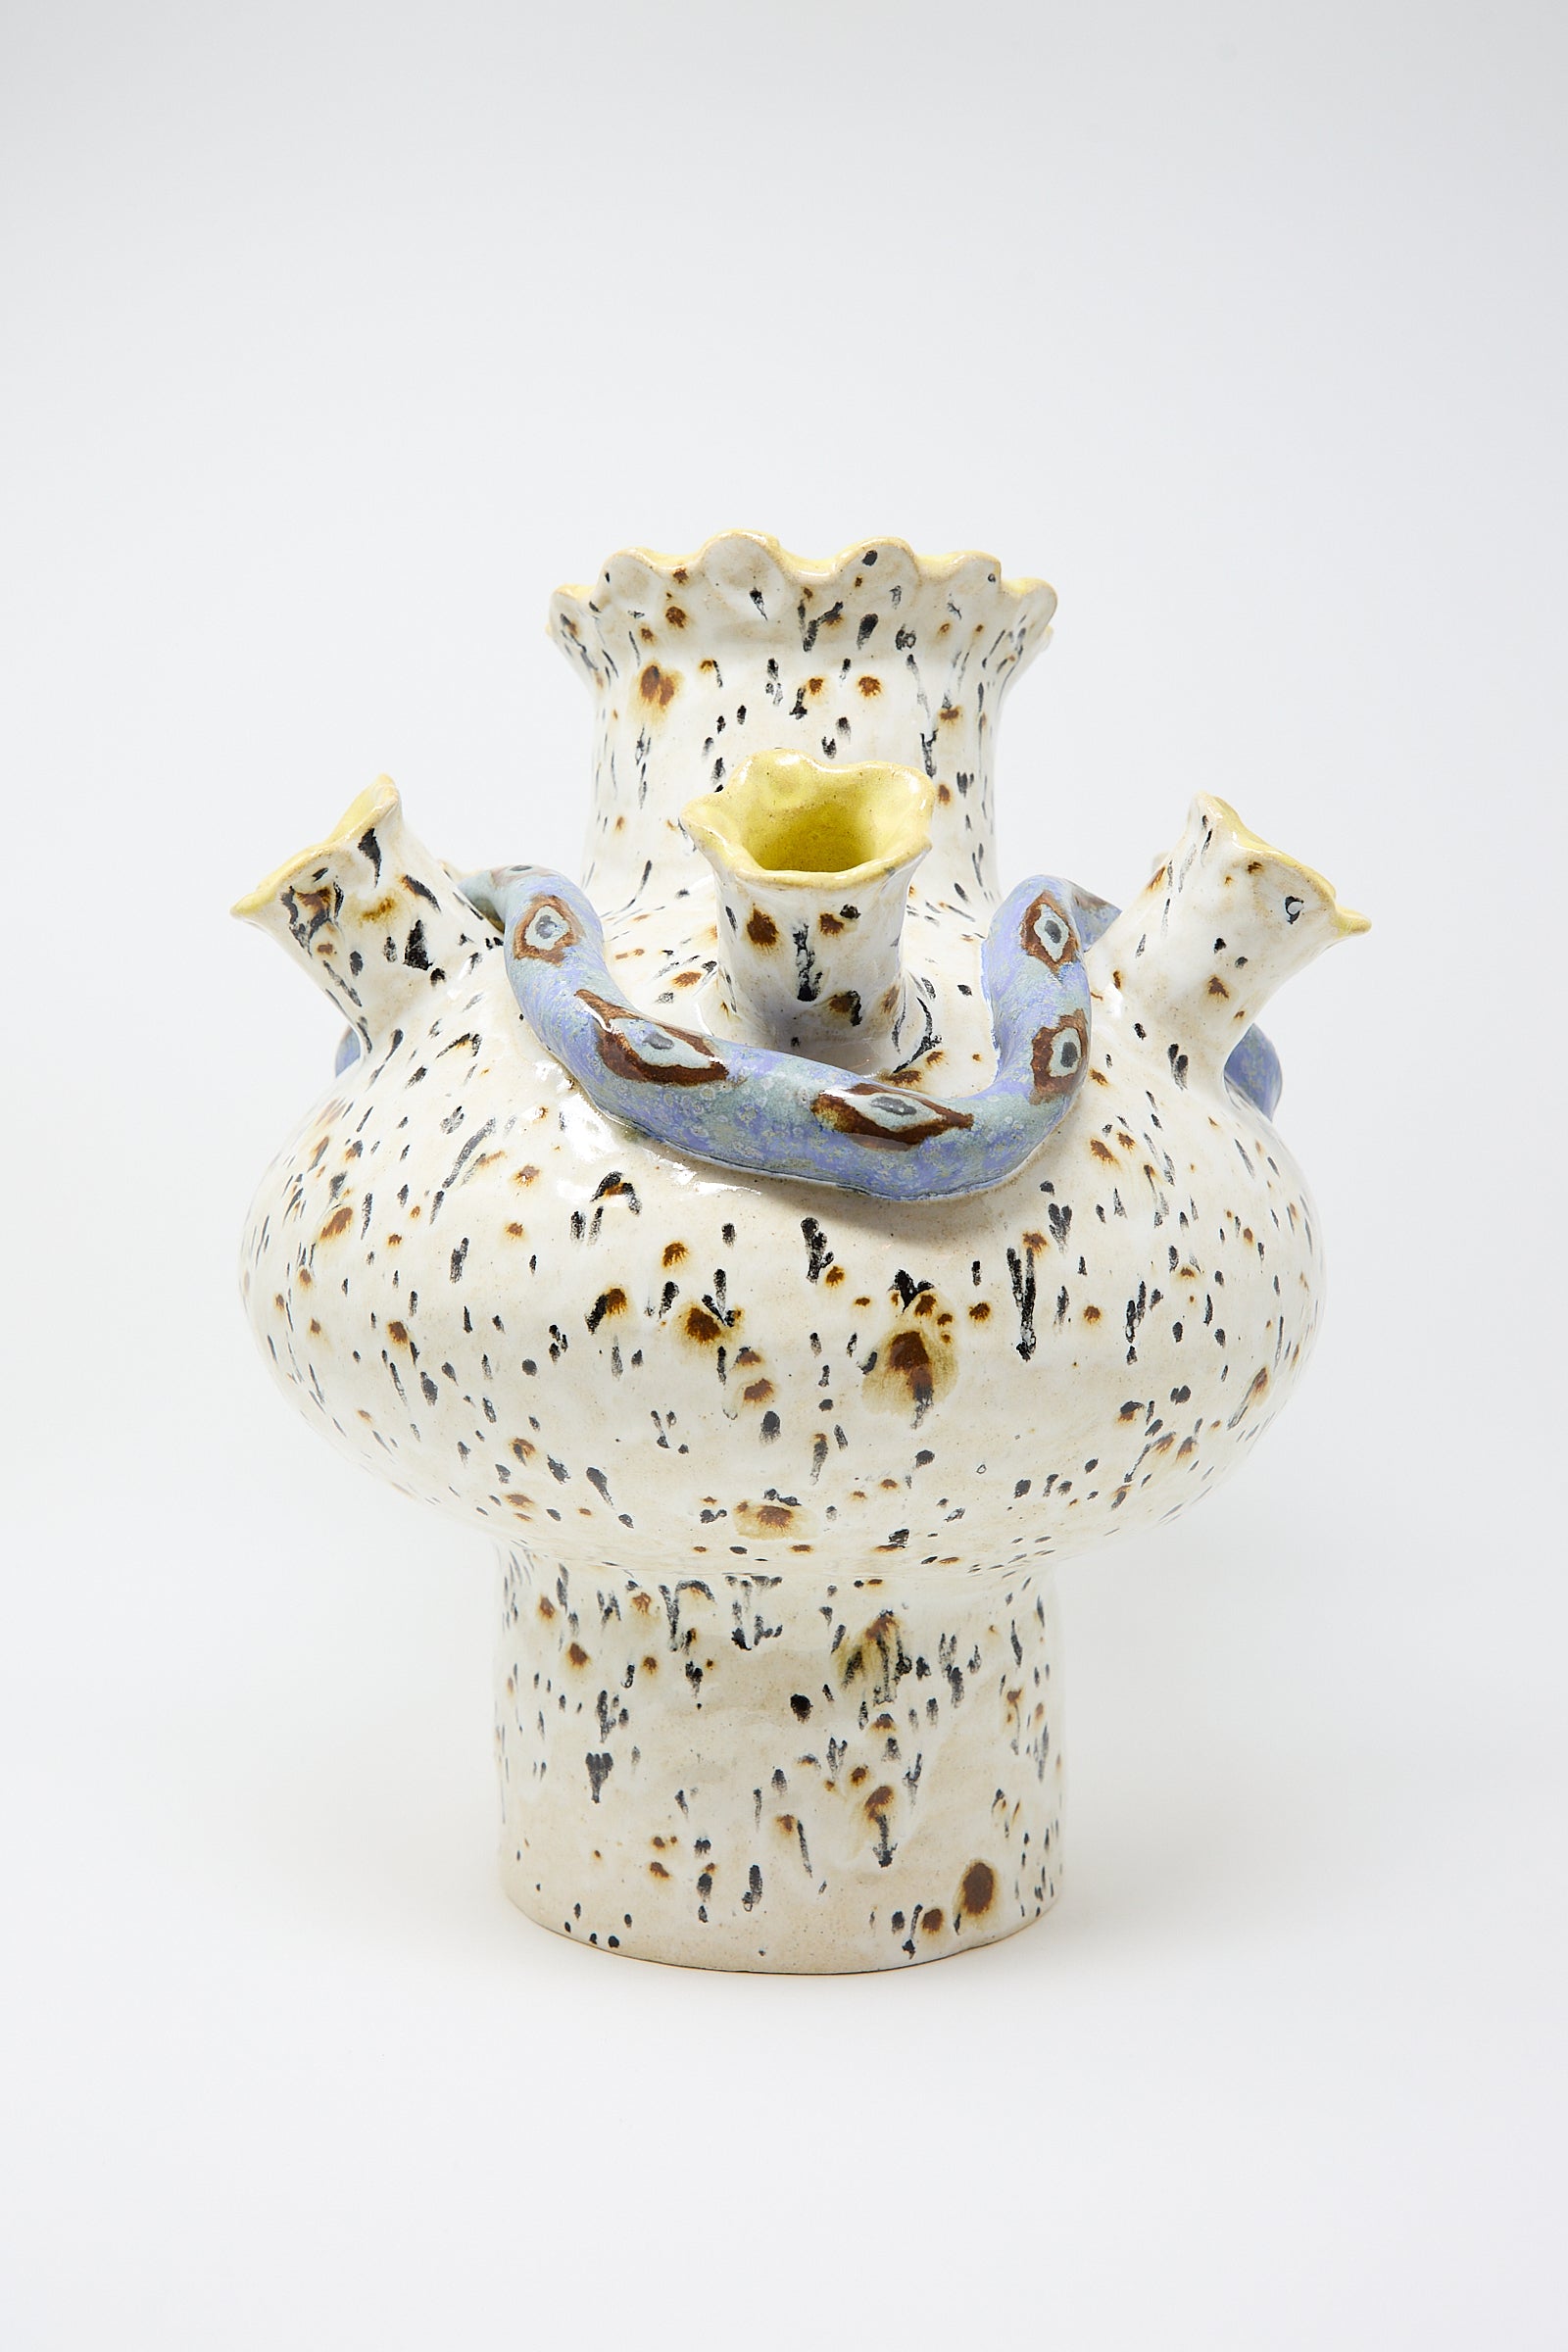 Handmade ceramic Snake Tulipiere with speckled design featuring multiple spouts topped by small bird figurines, set against a plain white background by Pearce Williams.